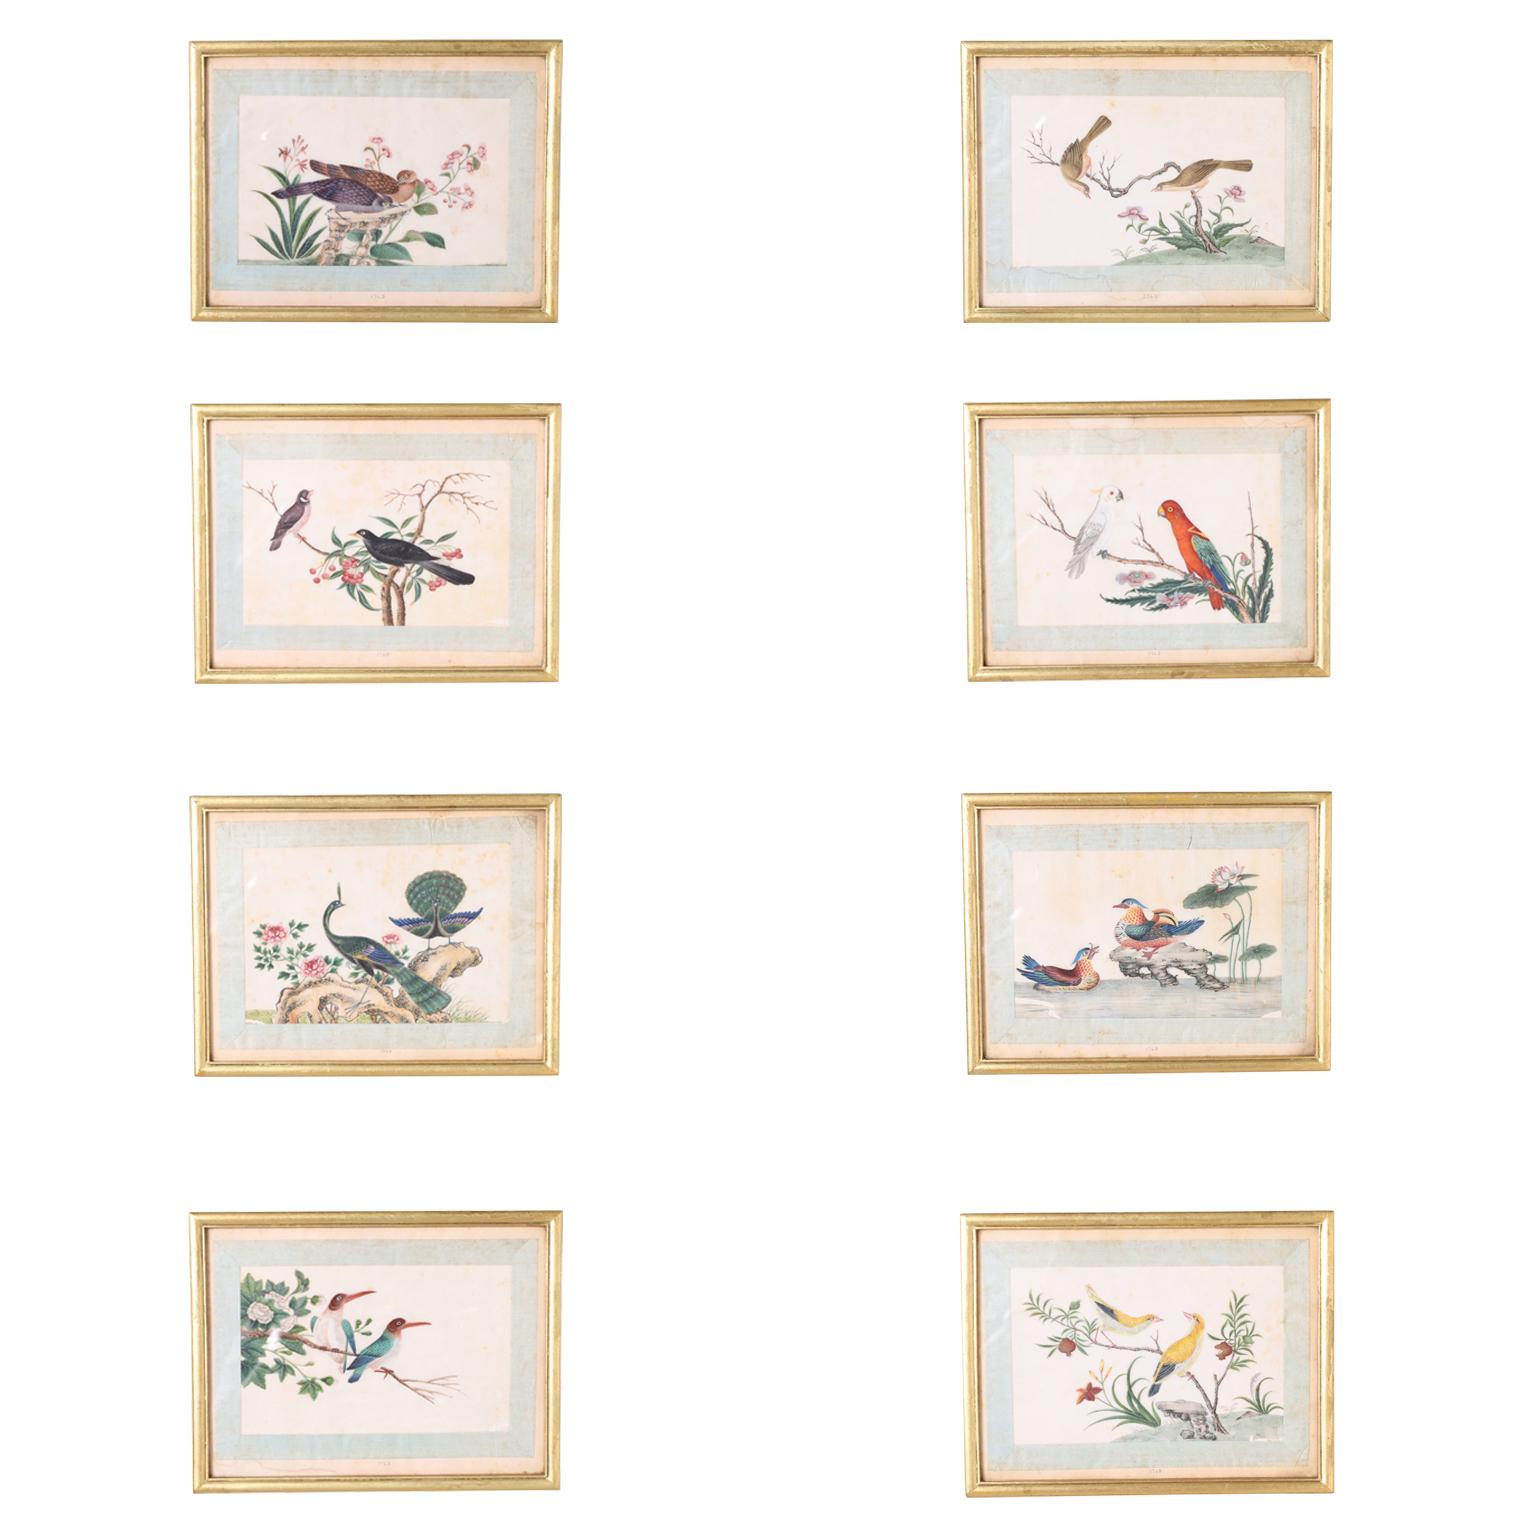 Rare and remarkable set of eight 18th century paintings of birds on silk executed with egg tempera in a delicate yet colorful style. Interesting historical footnote on the back of one. Presented under glass in a gilt wood frame.